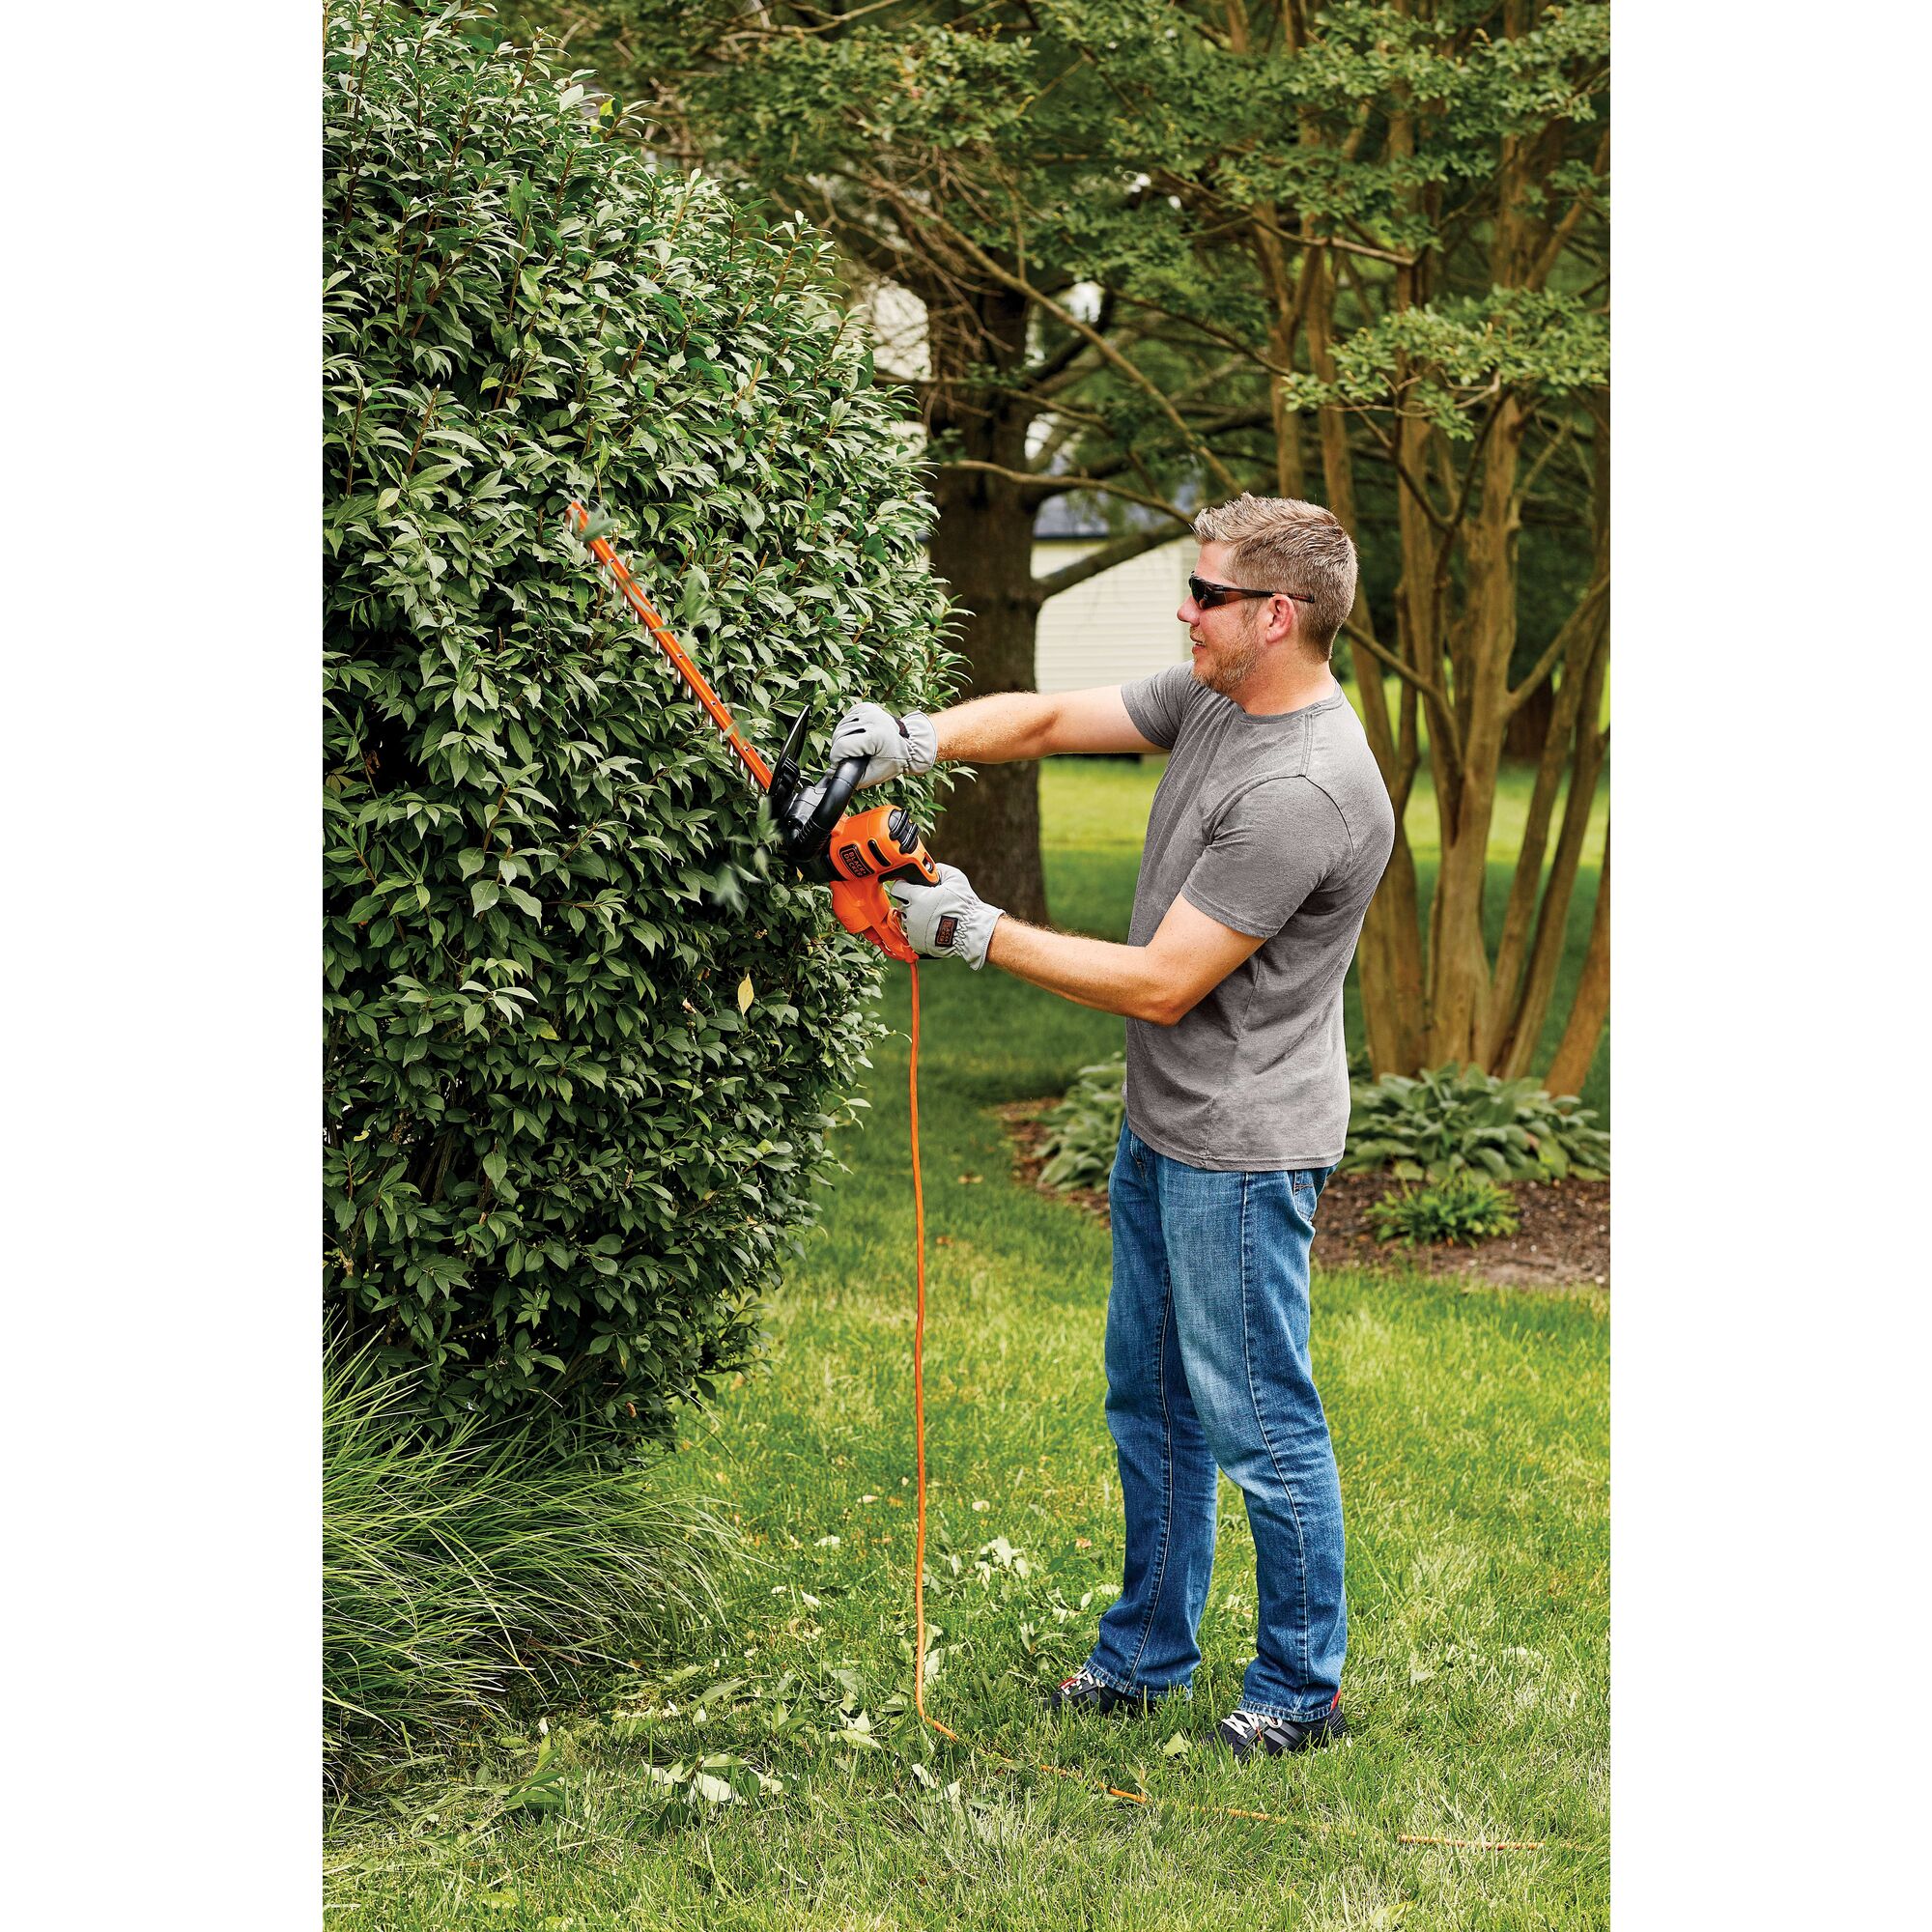 22 inch Electric hedge trimmer being used by a person to cut bushes.\n